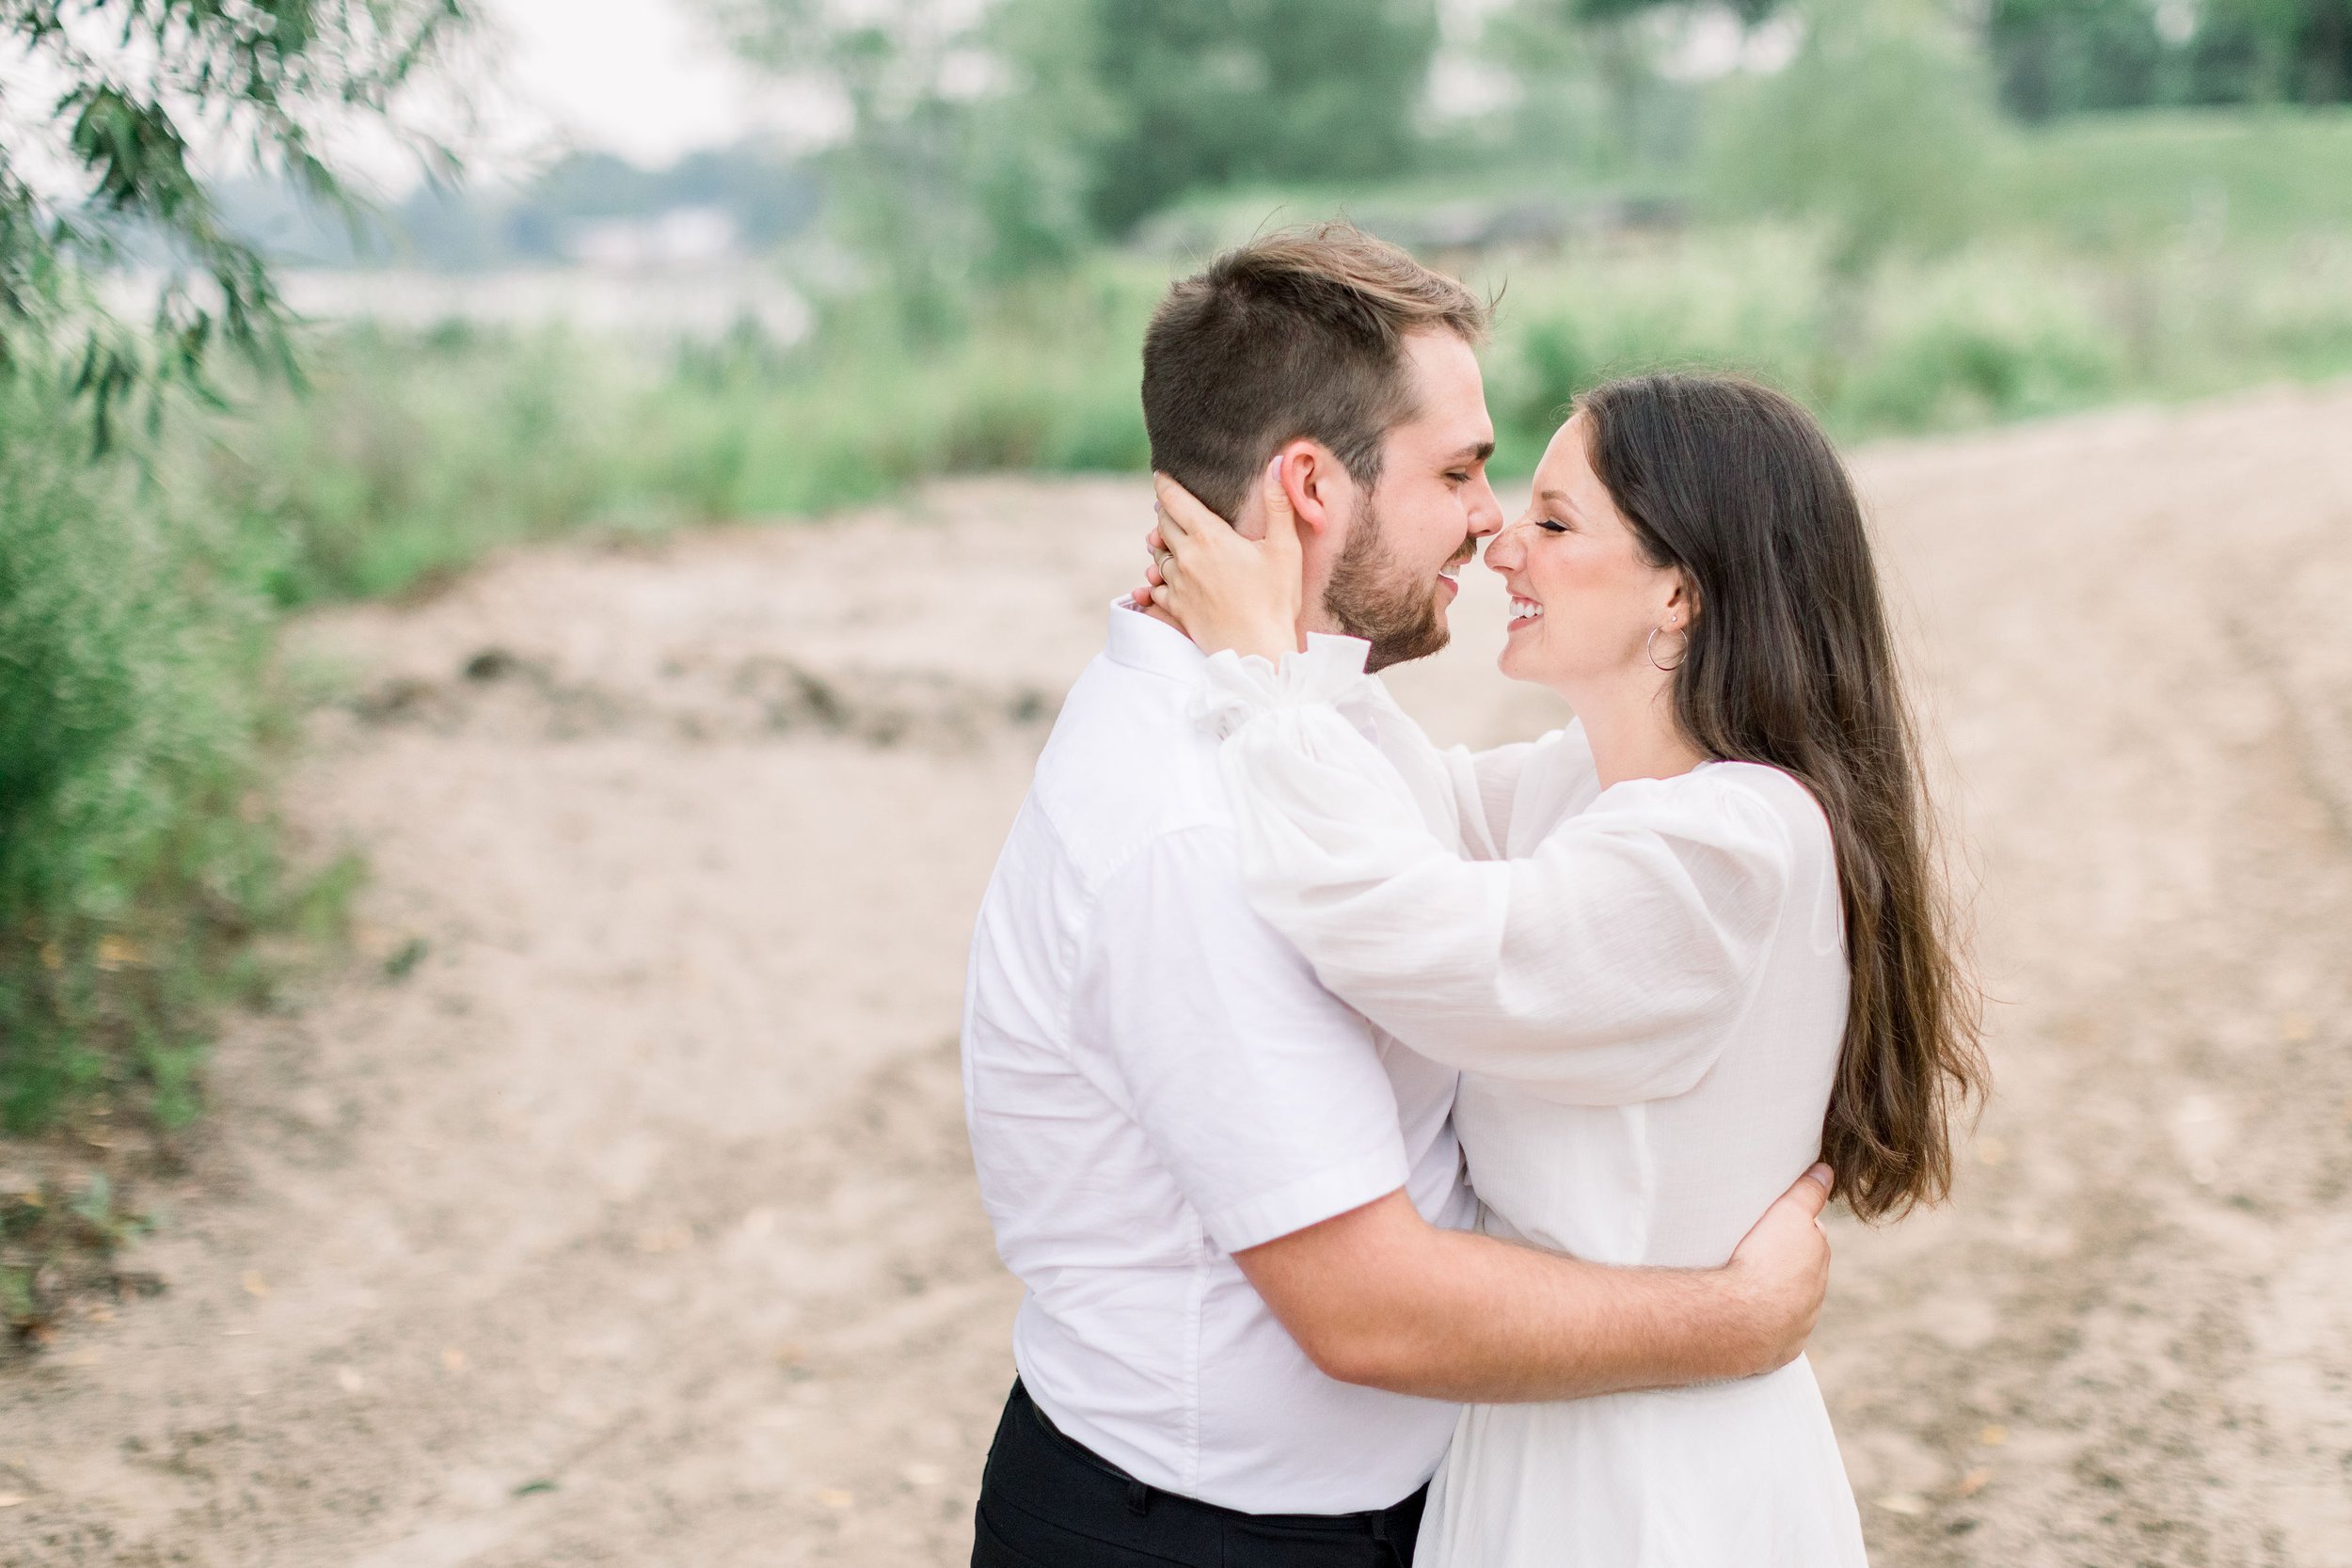  On a dirt path in Kingston Chelsea Mason Photography captures fiances kissing wearing white. white for engagements outdoors #Kingstonengagement #GrassCreekParkPortraits #Ontarioengagementphotographers #Chelseamasonphotography #Chelseamasonengagement